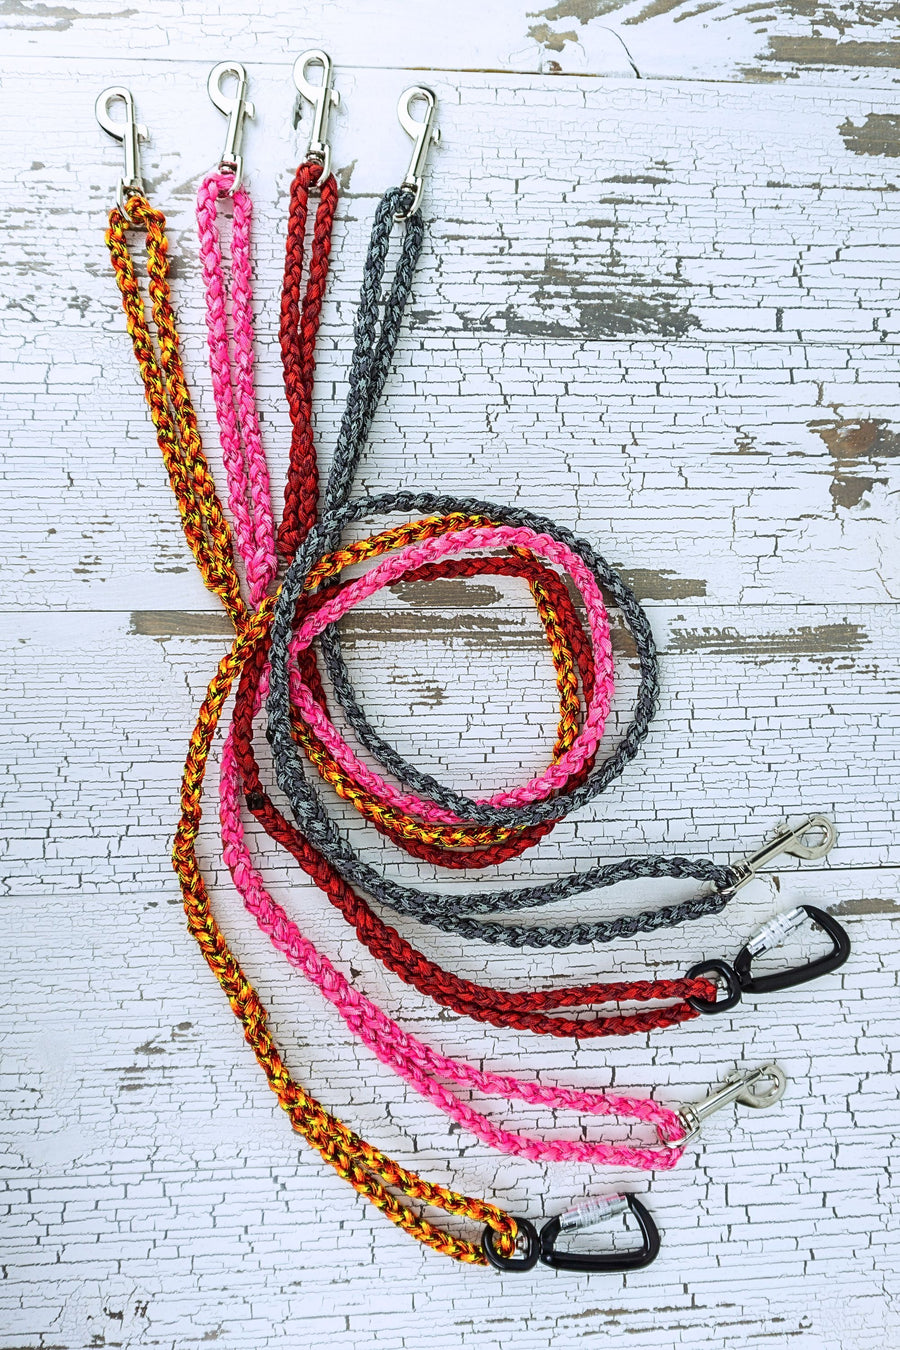 four different paracord leashes in the color blends of orange, pink, red, and gray in a swirled flat lay, showing loop handles at each end and two styles of hardware.